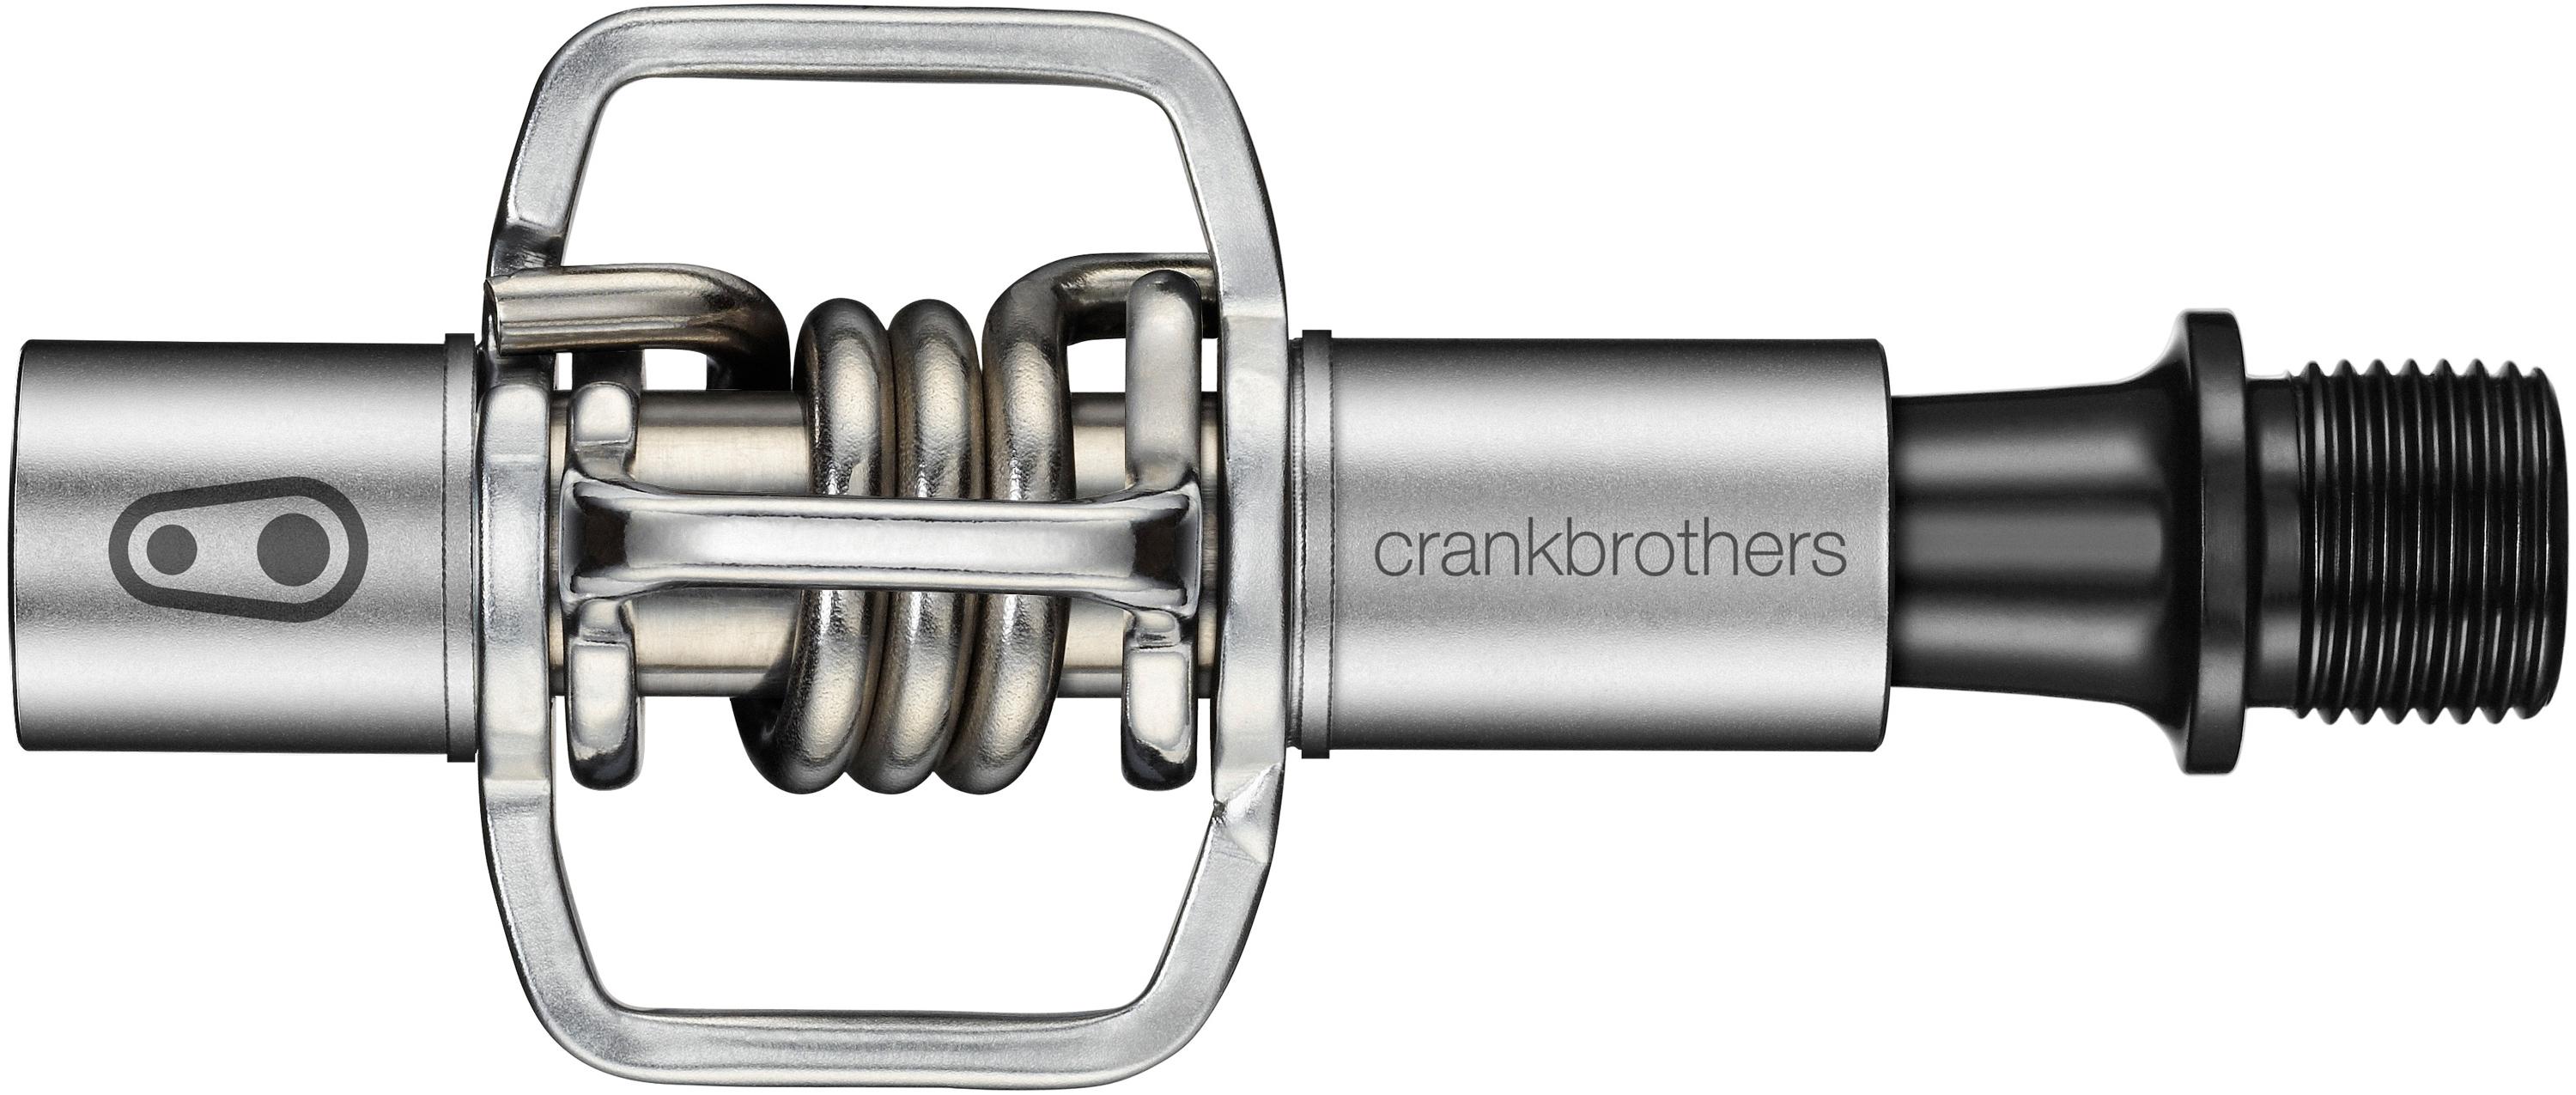 Crankbrothers Eggbeater 1 Mtb Pedals - Silver